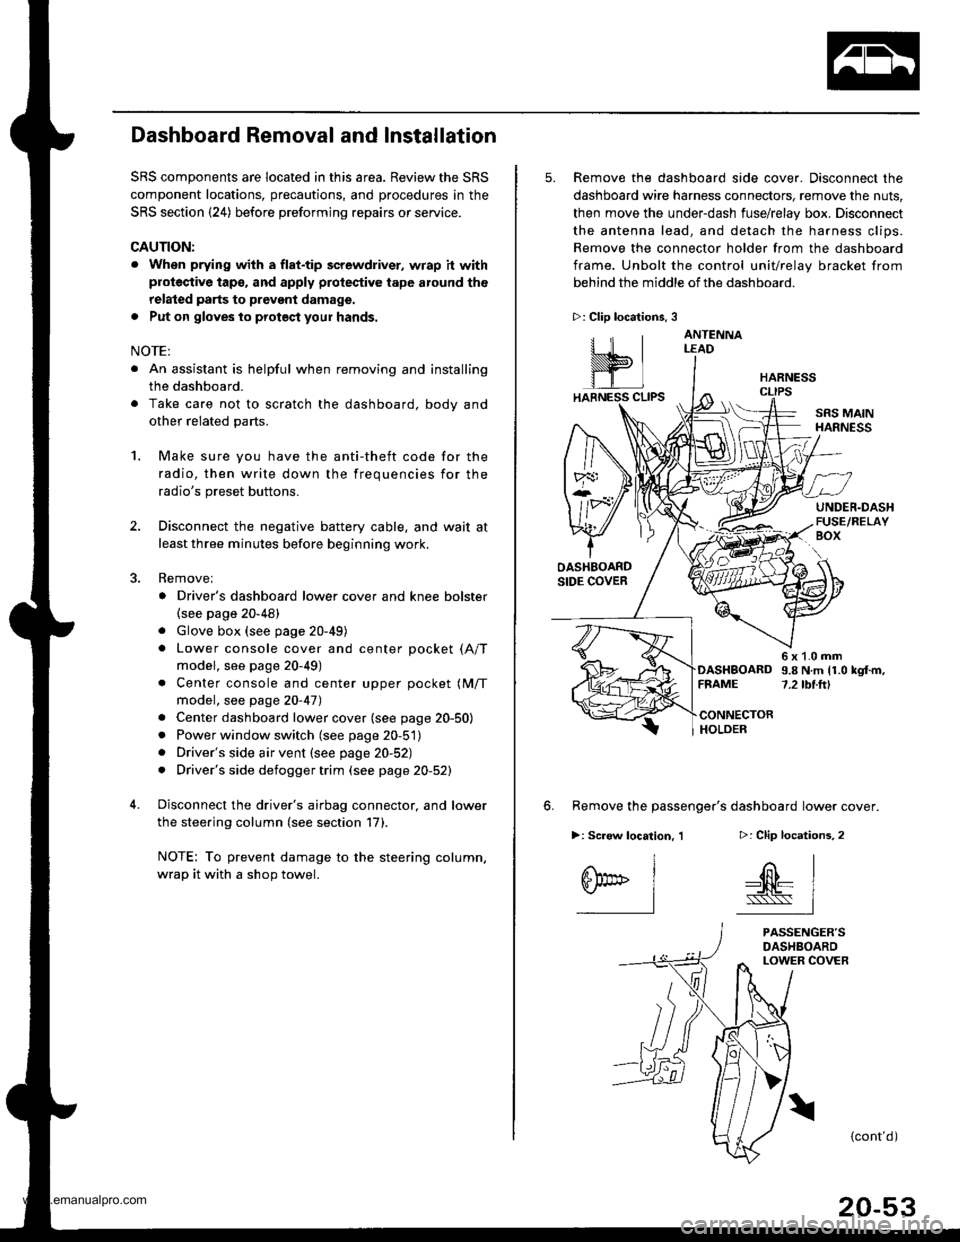 HONDA CR-V 2000 RD1-RD3 / 1.G User Guide 
Dashboard Removal and Installation
SRS components are located in this area. Review the SRS
component locations, precautions, and procedures in the
SRS section {24) before preforming repairs or servic